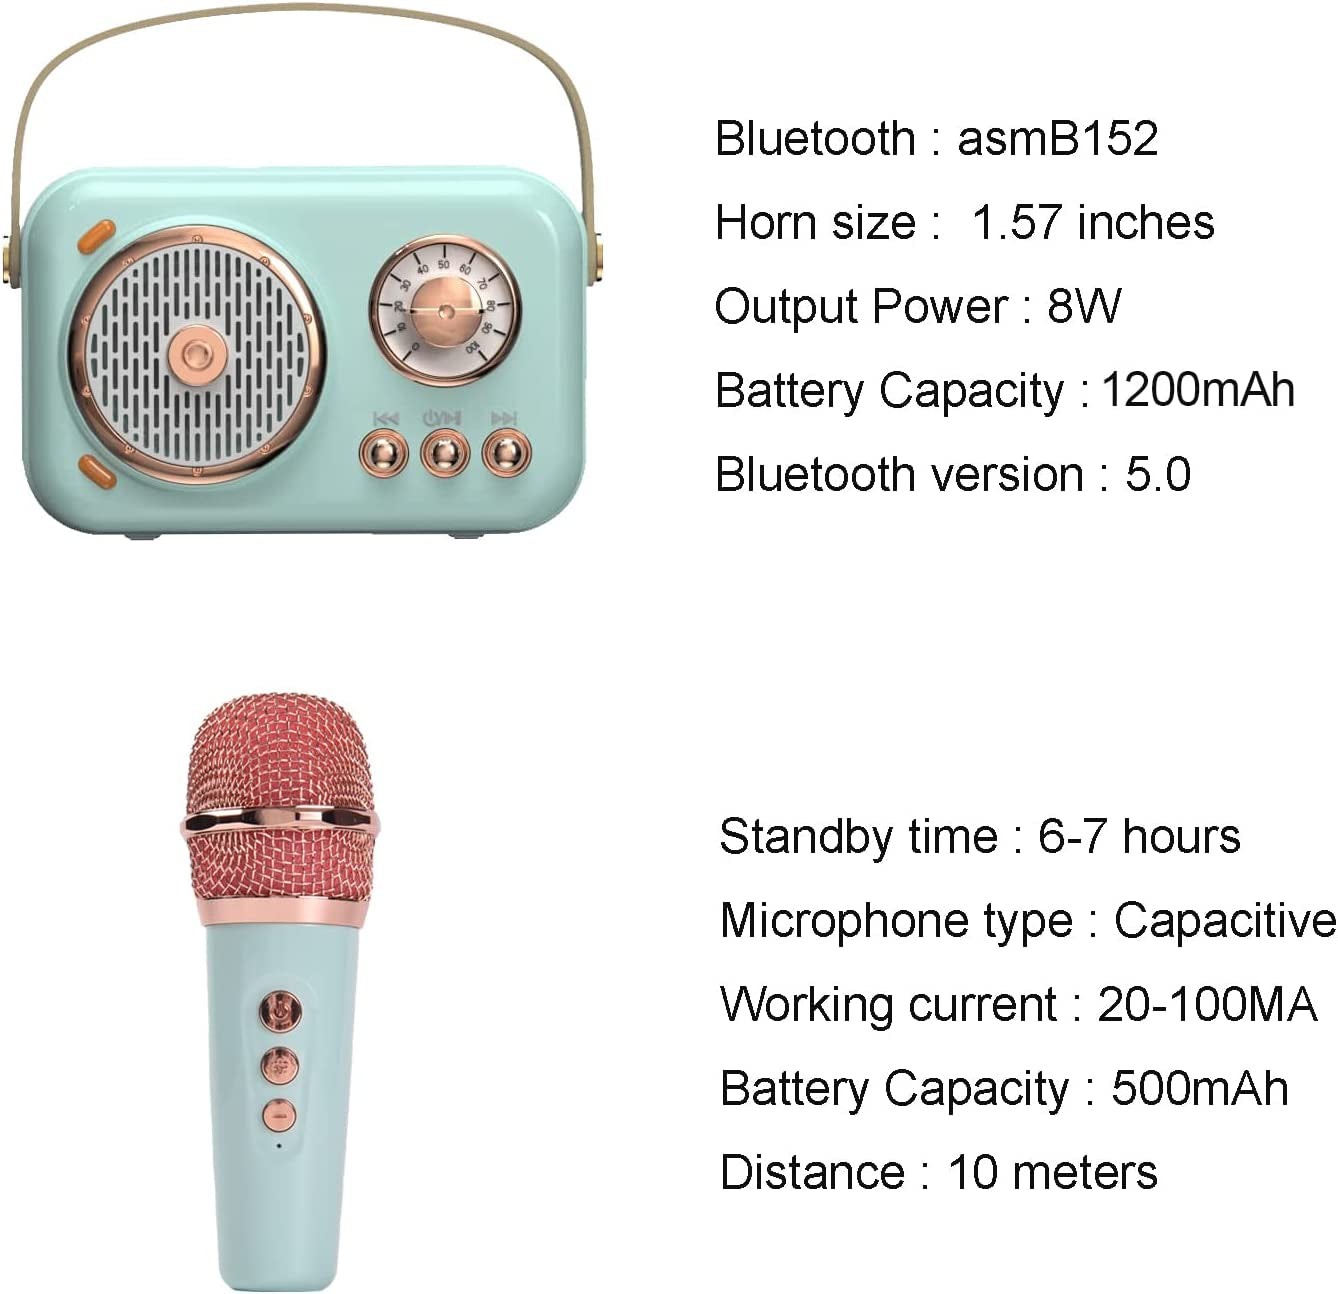 Home Karaoke Machine - Portable Bluetooth Speaker with Microphone Set, Retro Design for Kids and Adults, Ideal for Home Parties and Birthdays - Blue